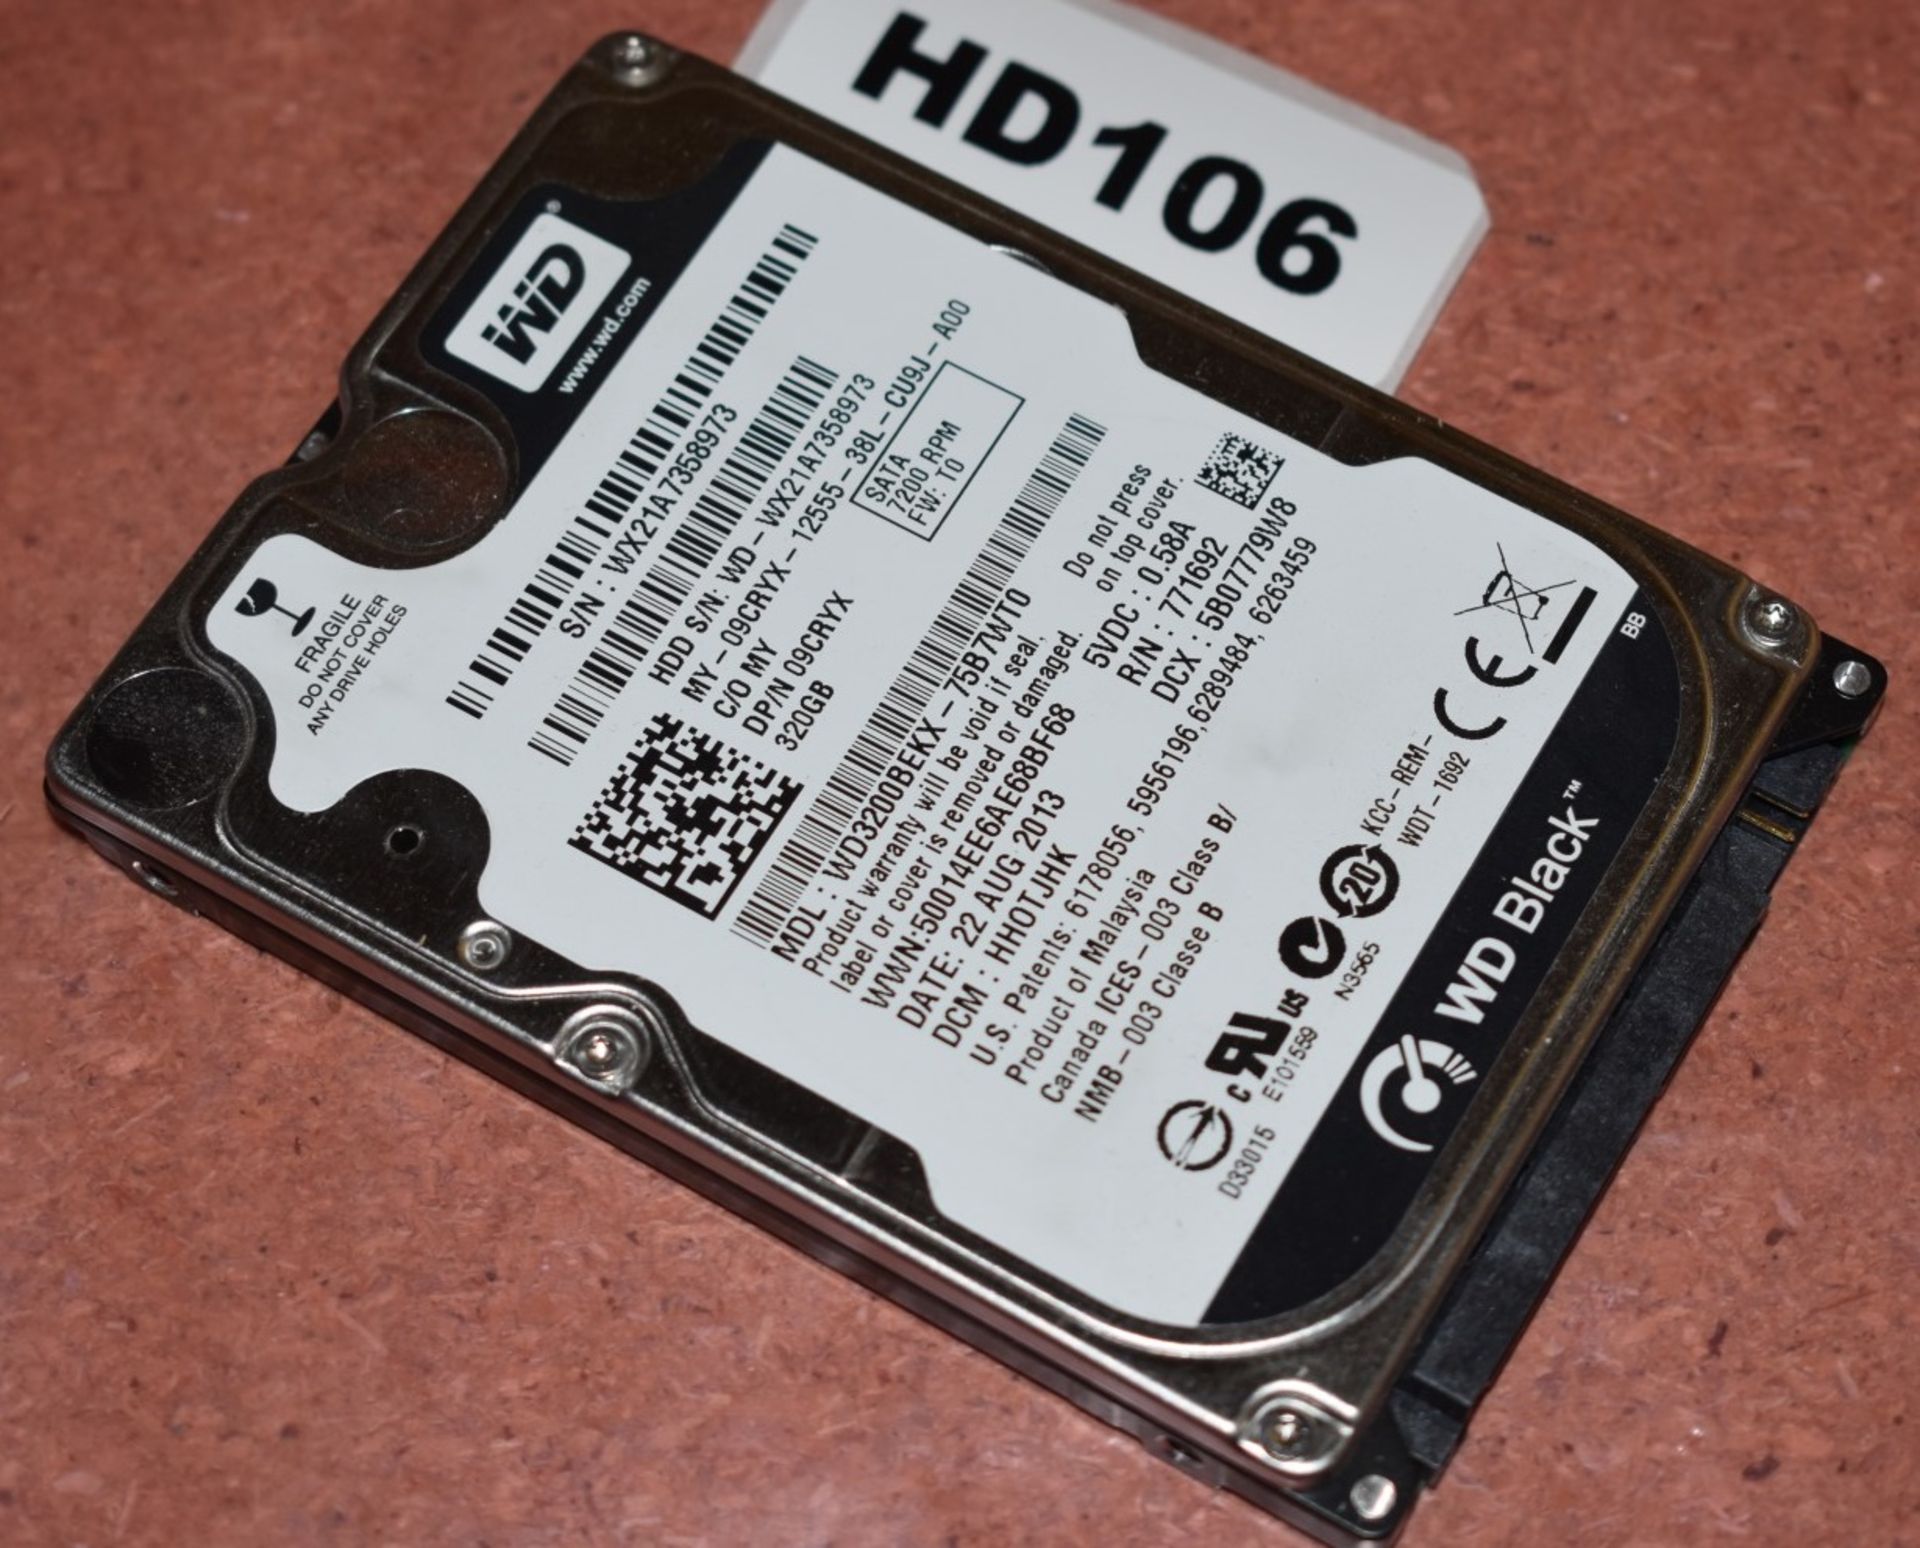 4 x Western Digital 320gb Black 2.5 Inch SATA Hard Drives - Tested and Formatted - HD104/105/106/112 - Image 2 of 4